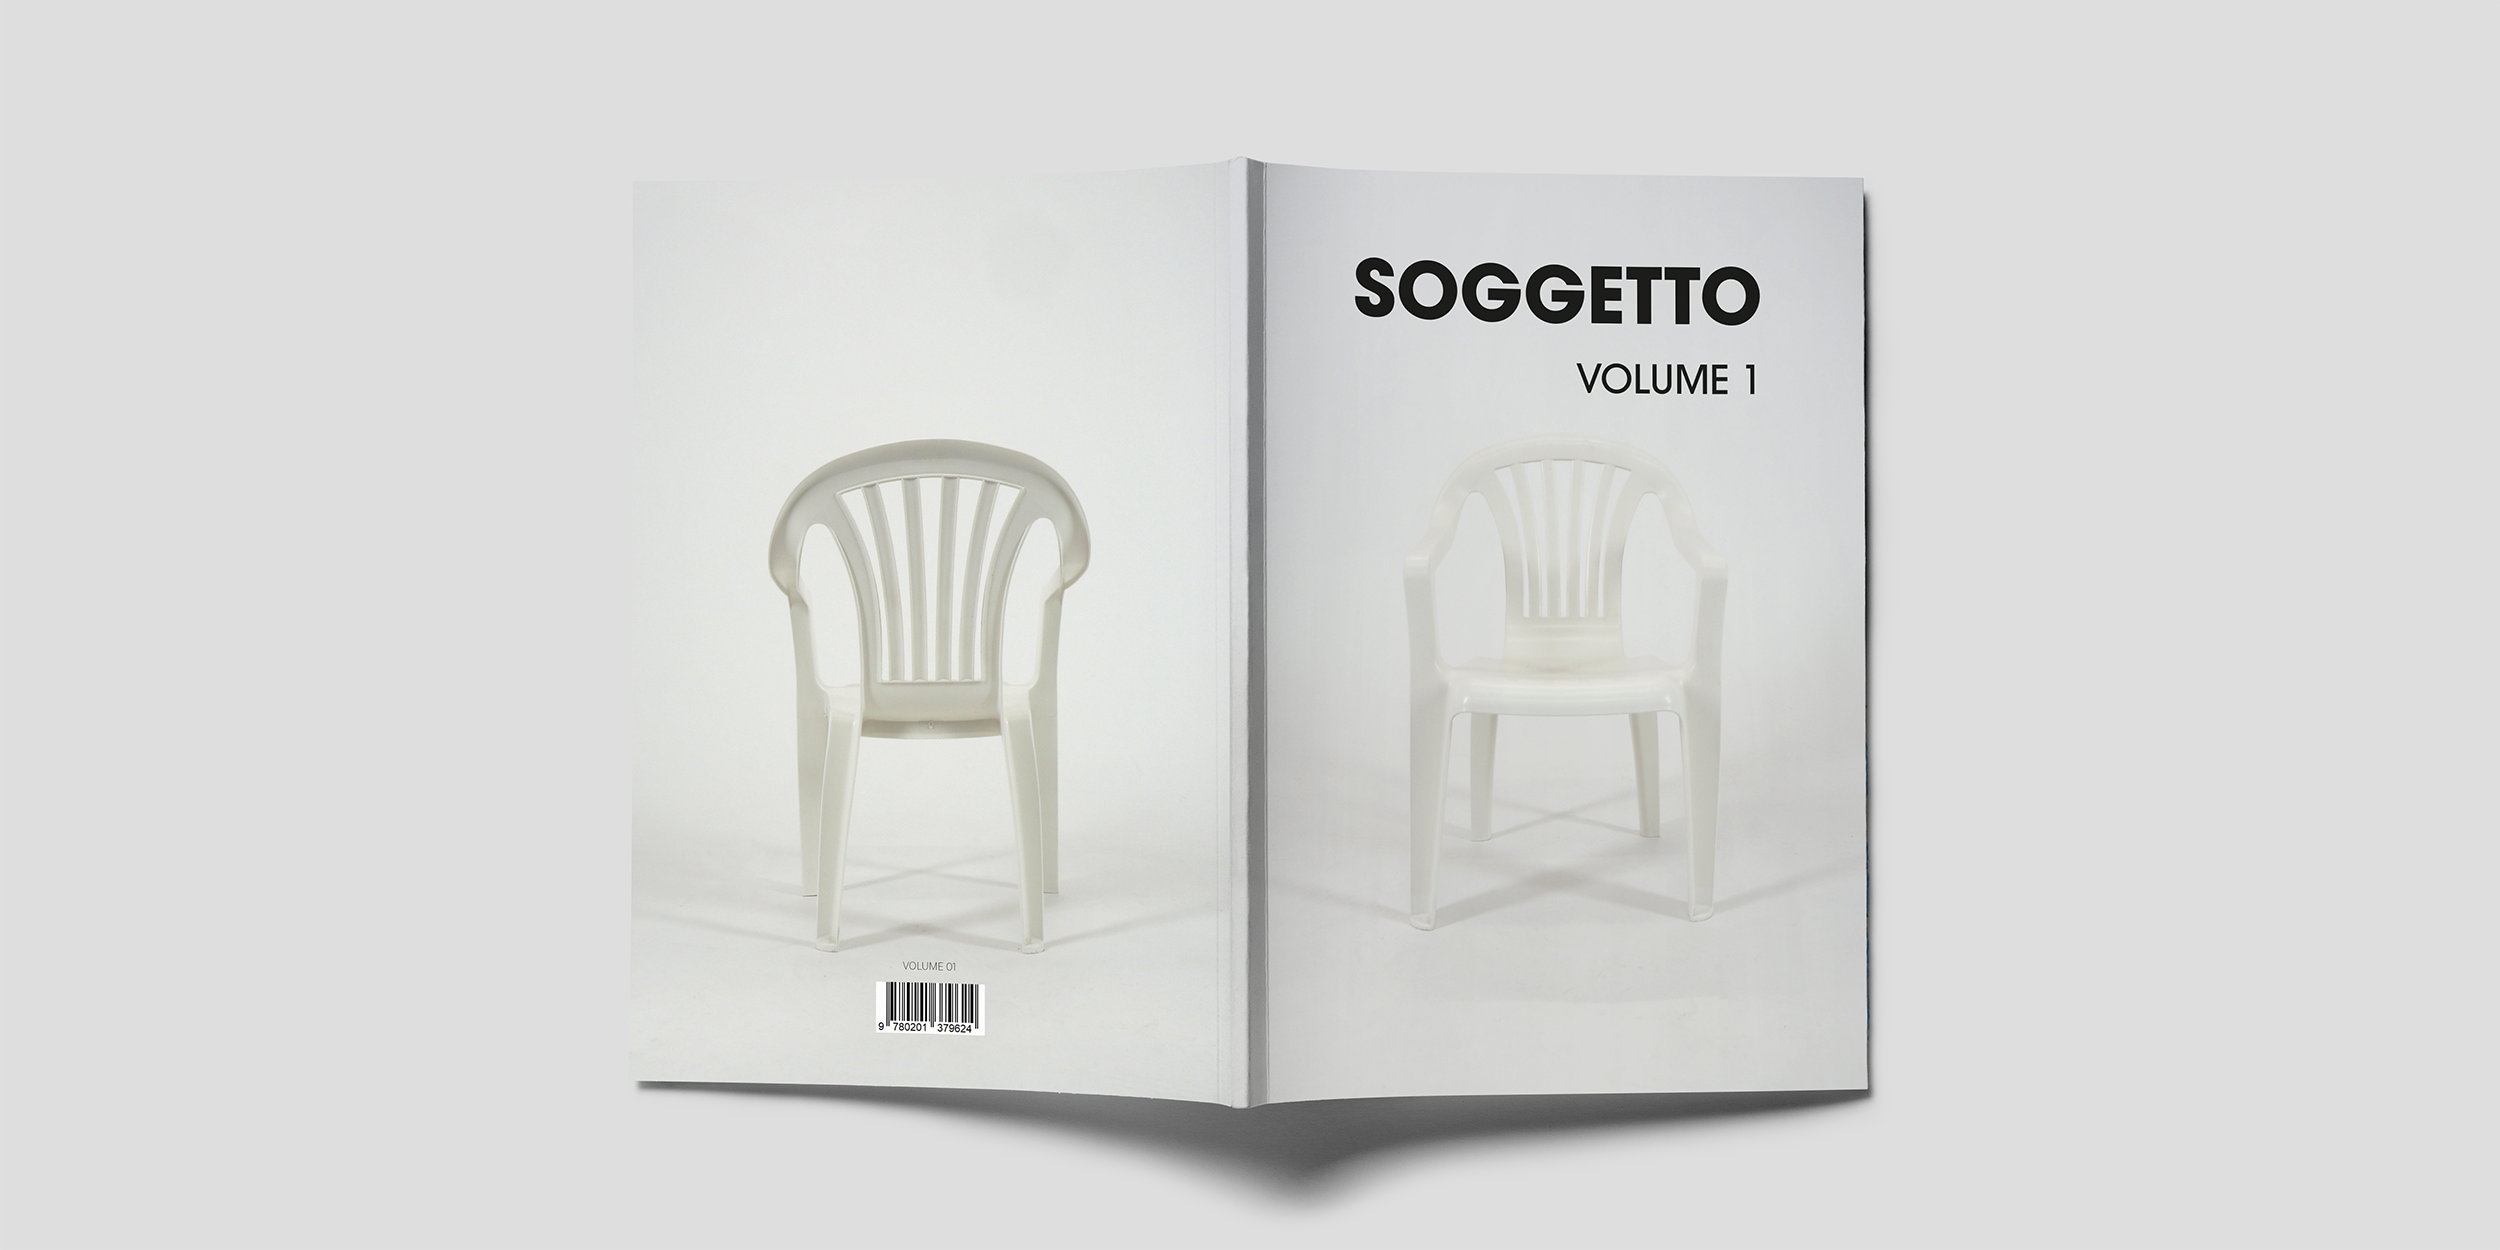 Publishing work by Biagio Santoro showing an example of a magazine series.